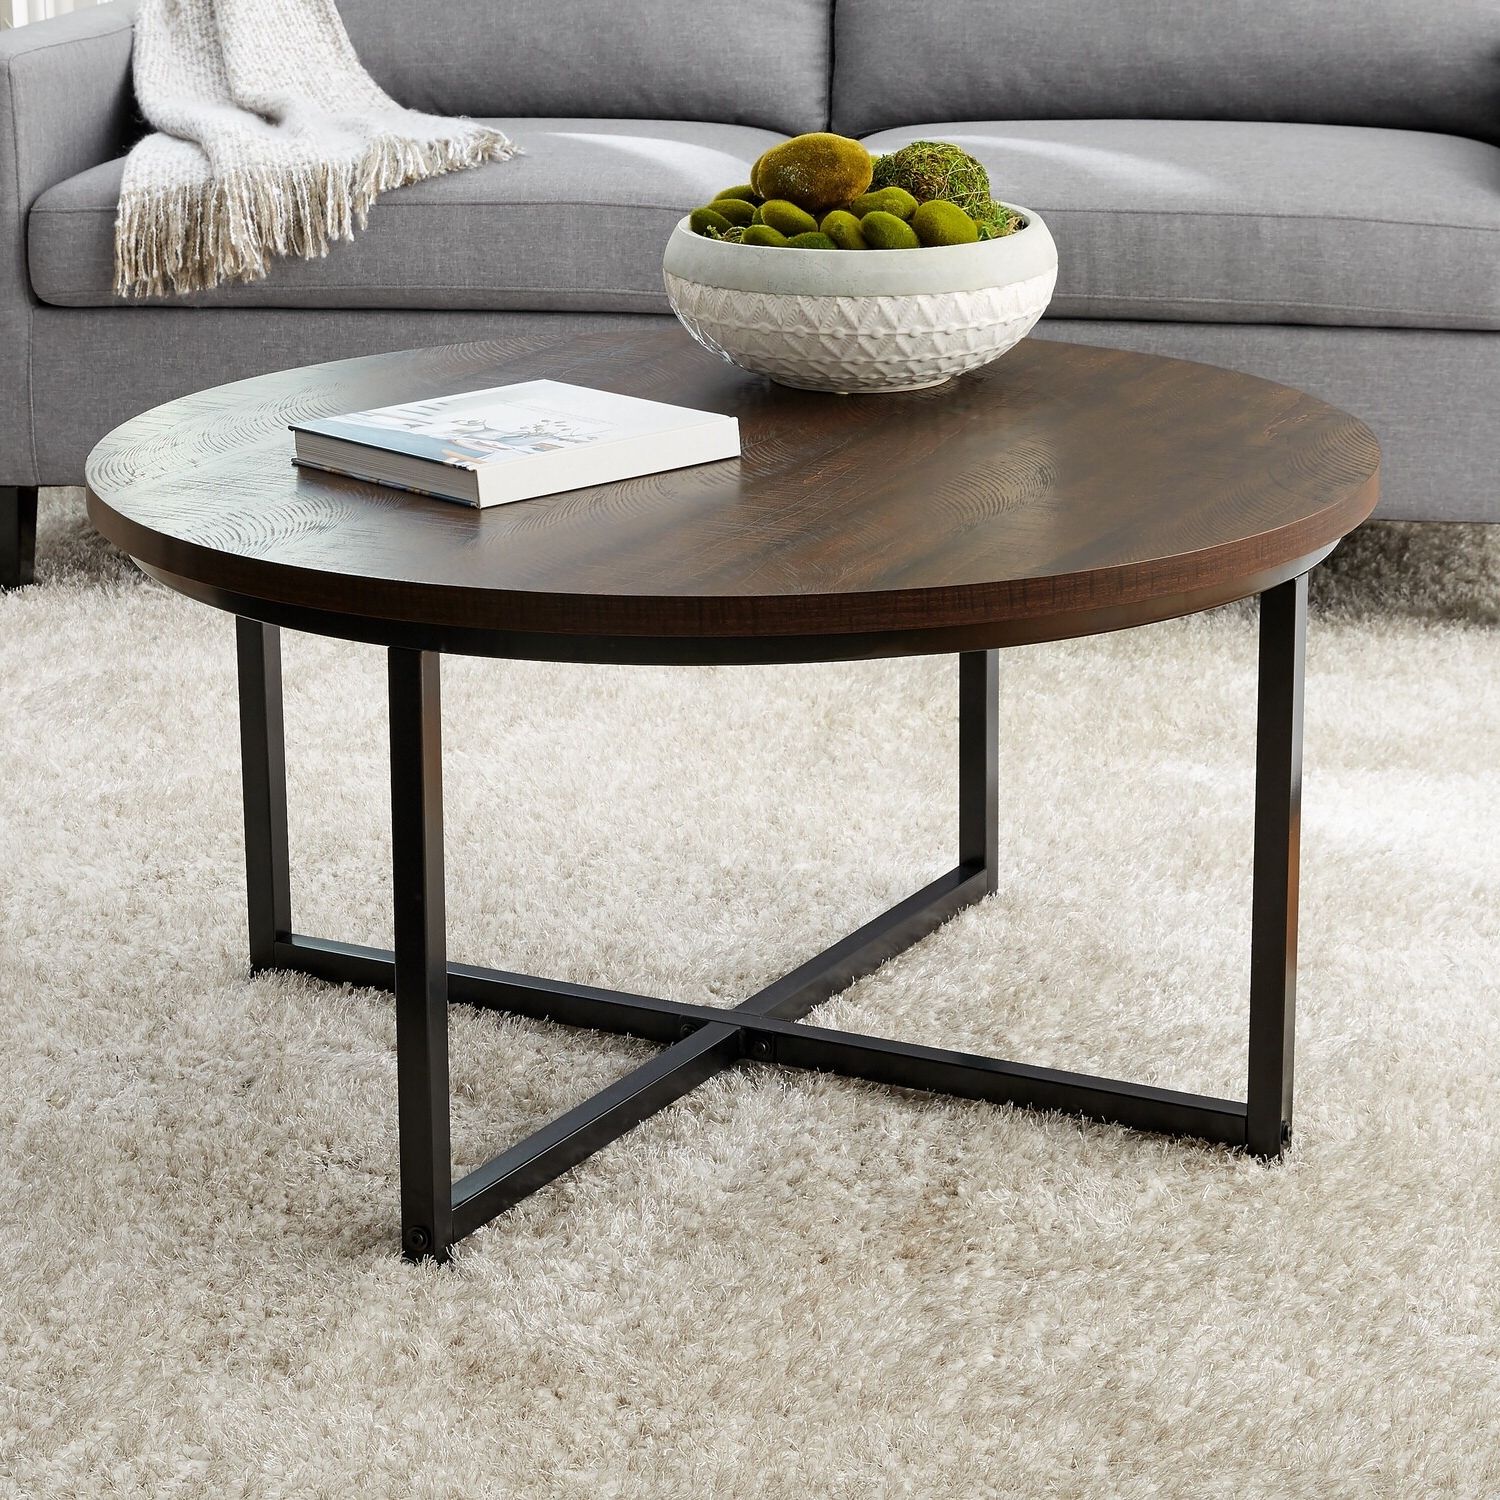 Metal Legs And Oak Top Round Coffee Tables Intended For 2019 Round Coffee Table With Metal Legs, 36" D X 19" H (View 2 of 10)